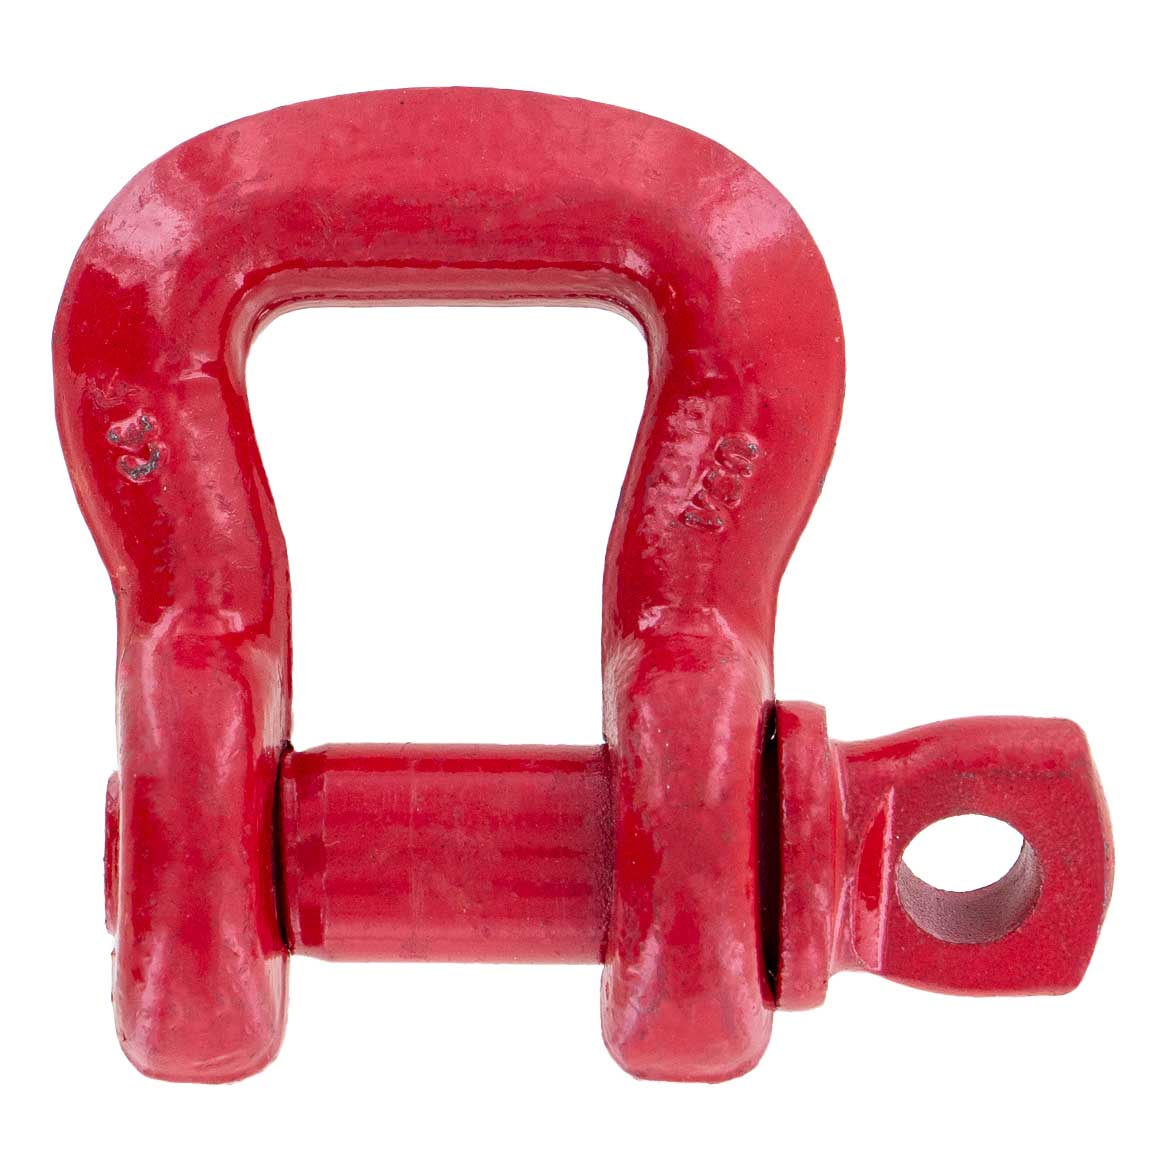 Crosby® Screw Pin Sling Saver Shackle | S-253 - 1-1/2"- 6.5 Ton primary image